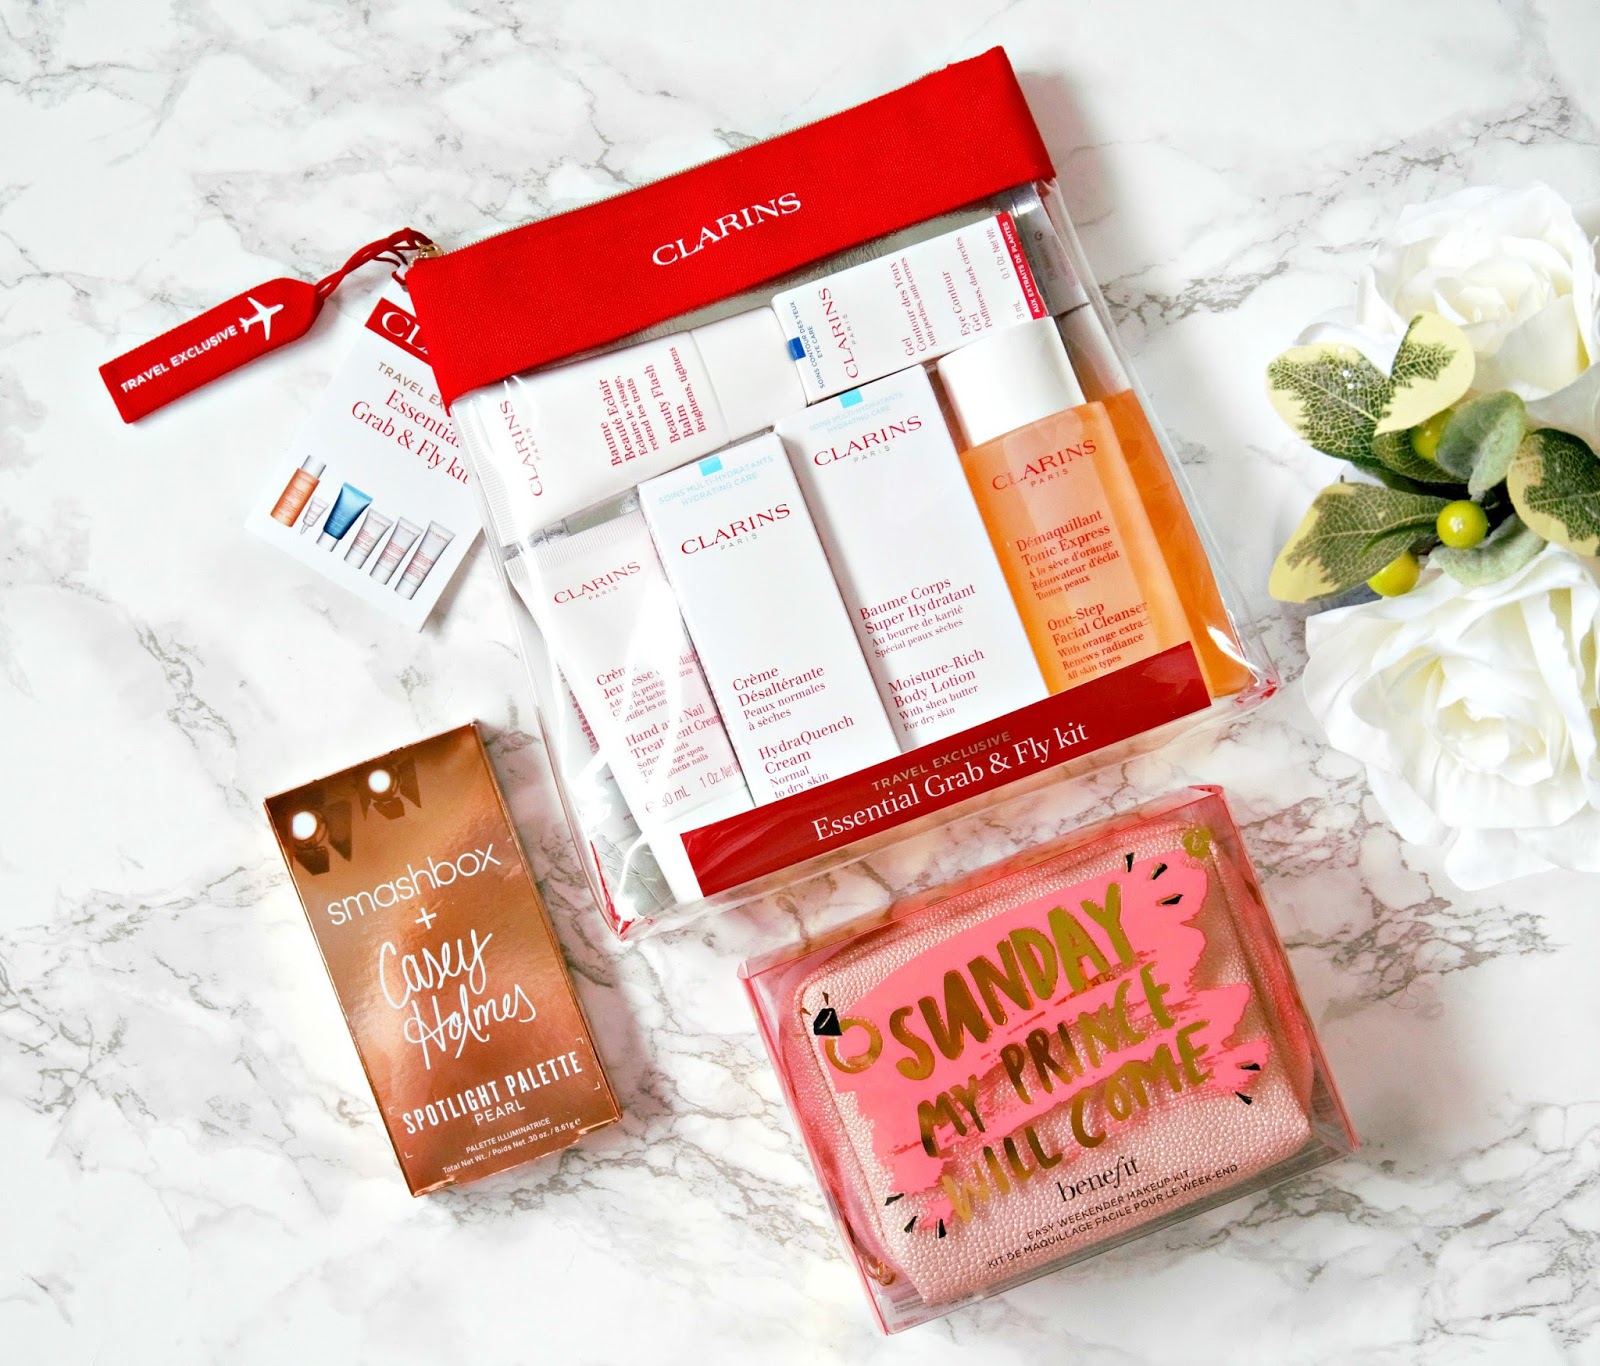 Clarins Travel Exclusive, Essential Grab & Fly Kit, Smashbox x Casey Holmes Spotlight Palette, Benefit Sunday My Prince Will Come